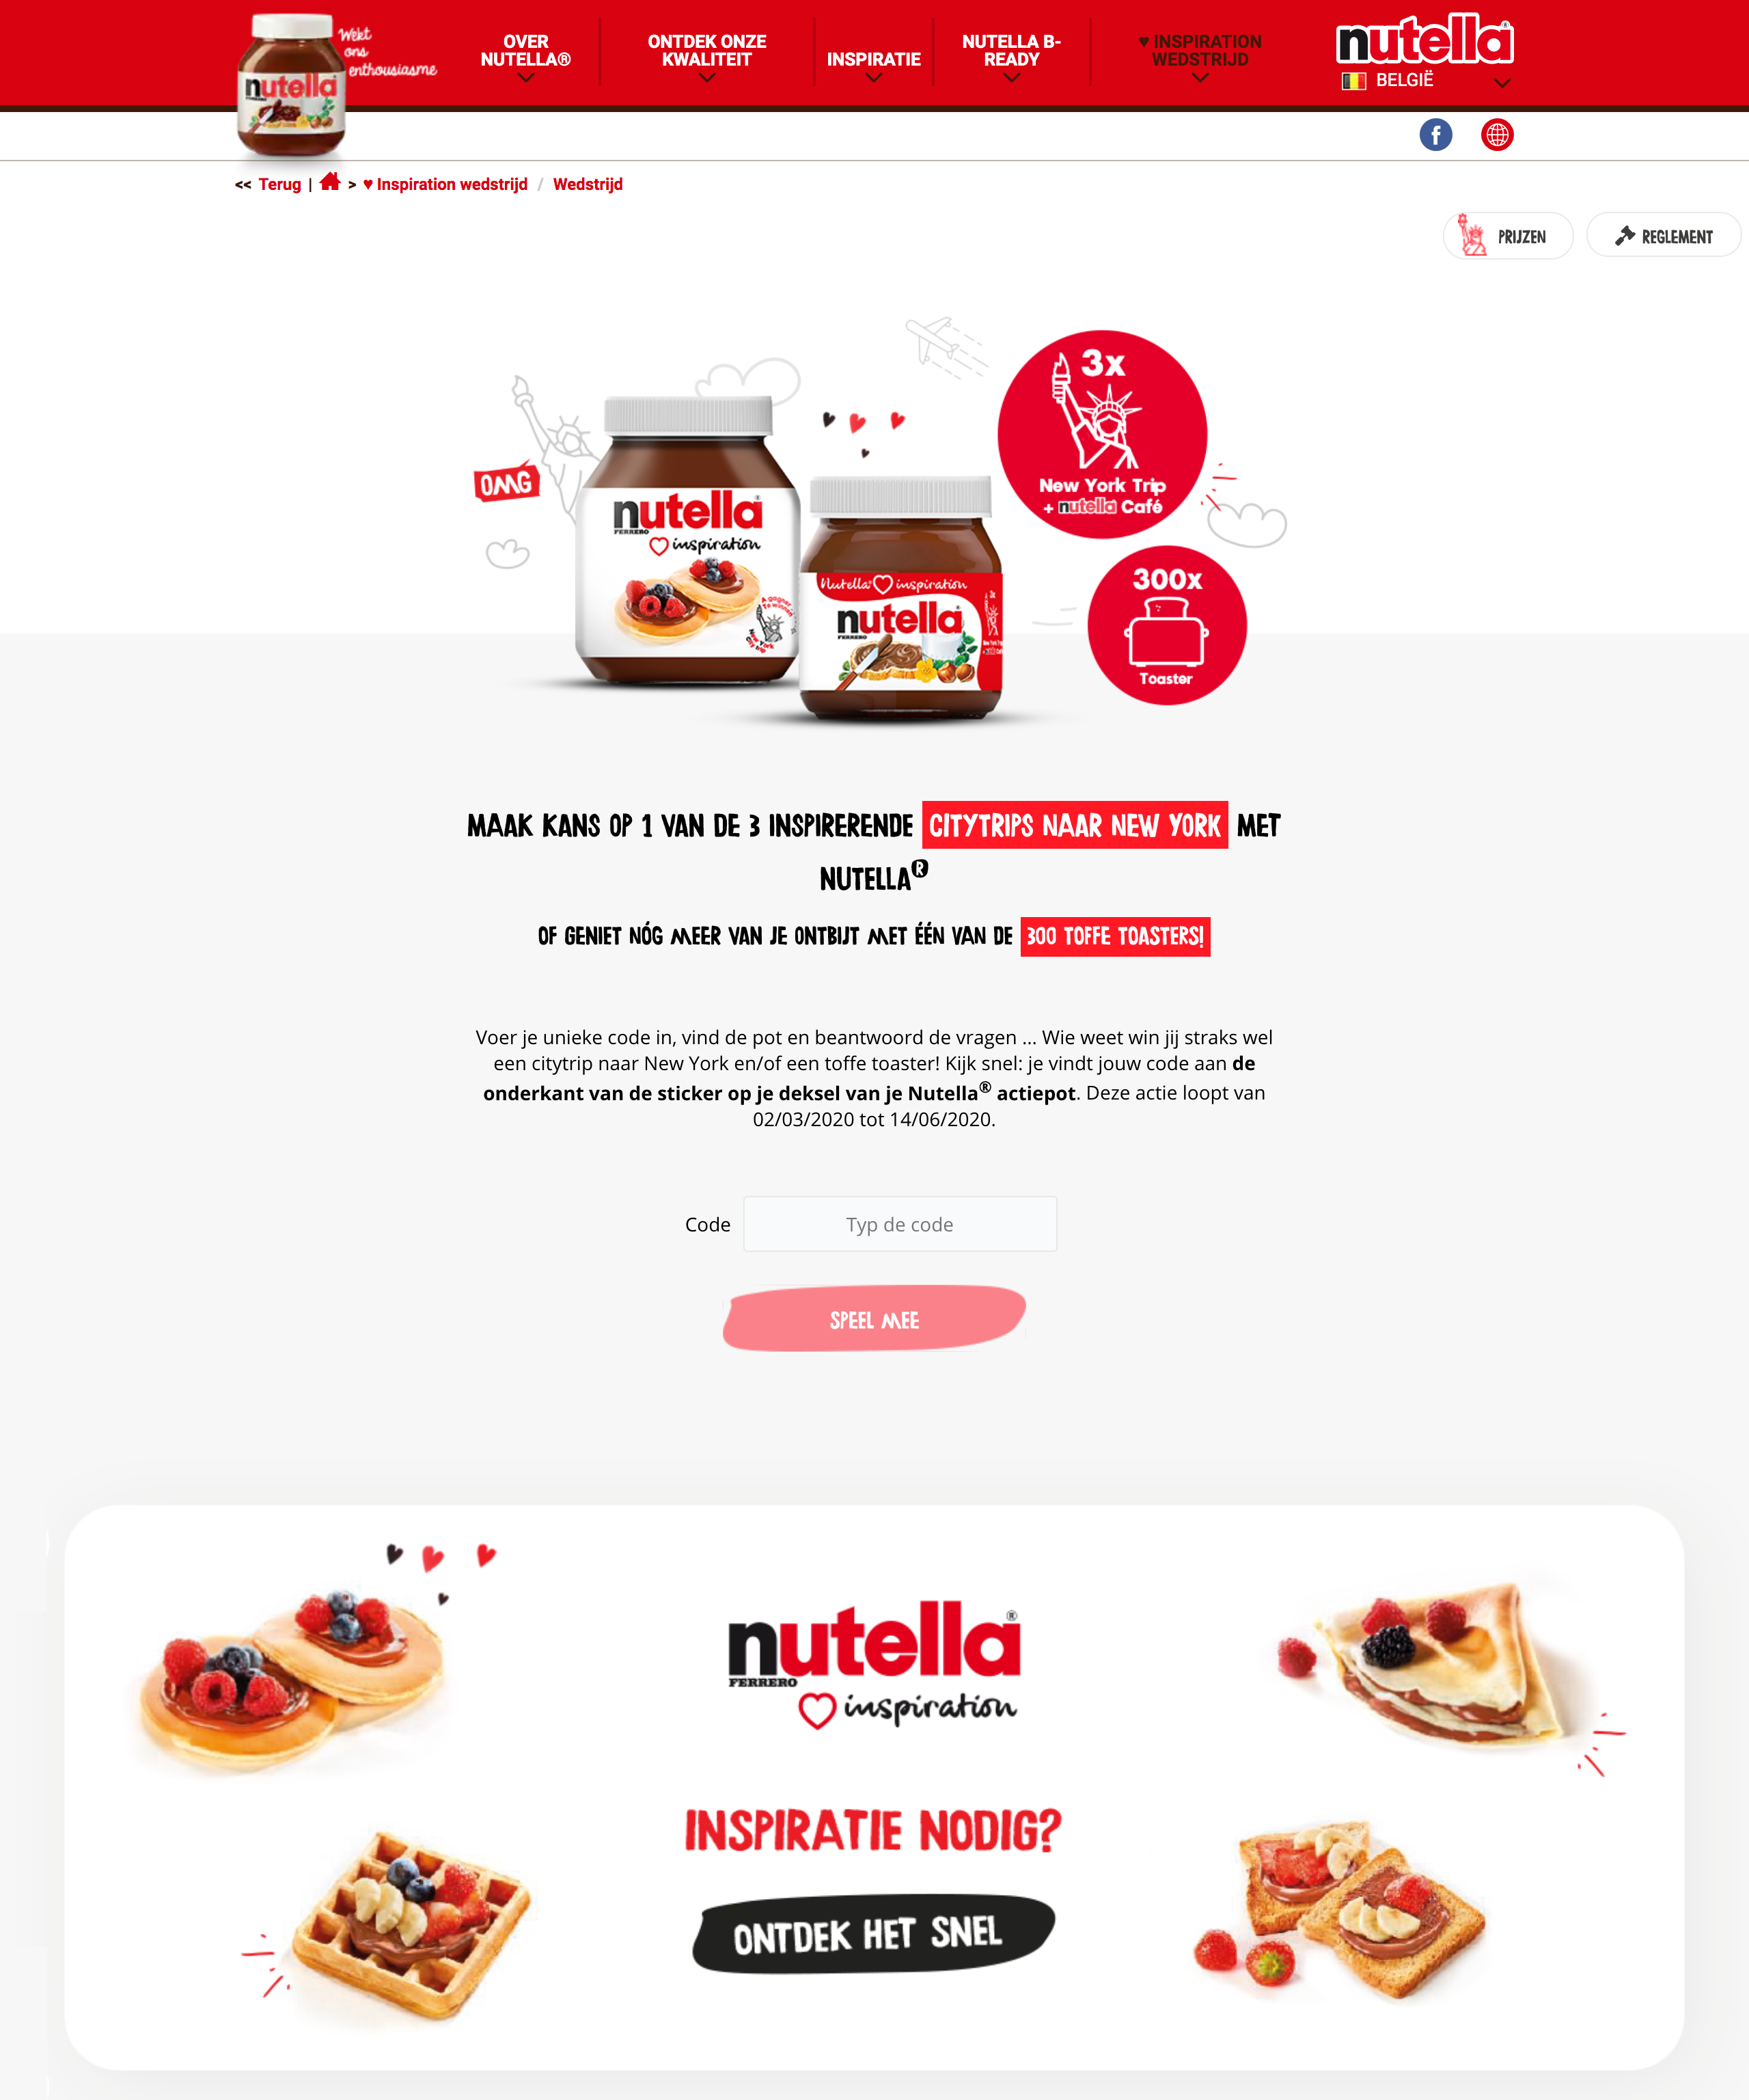 mays-best-interactive-marketing-campaigns-covid-19-nutella-new-york